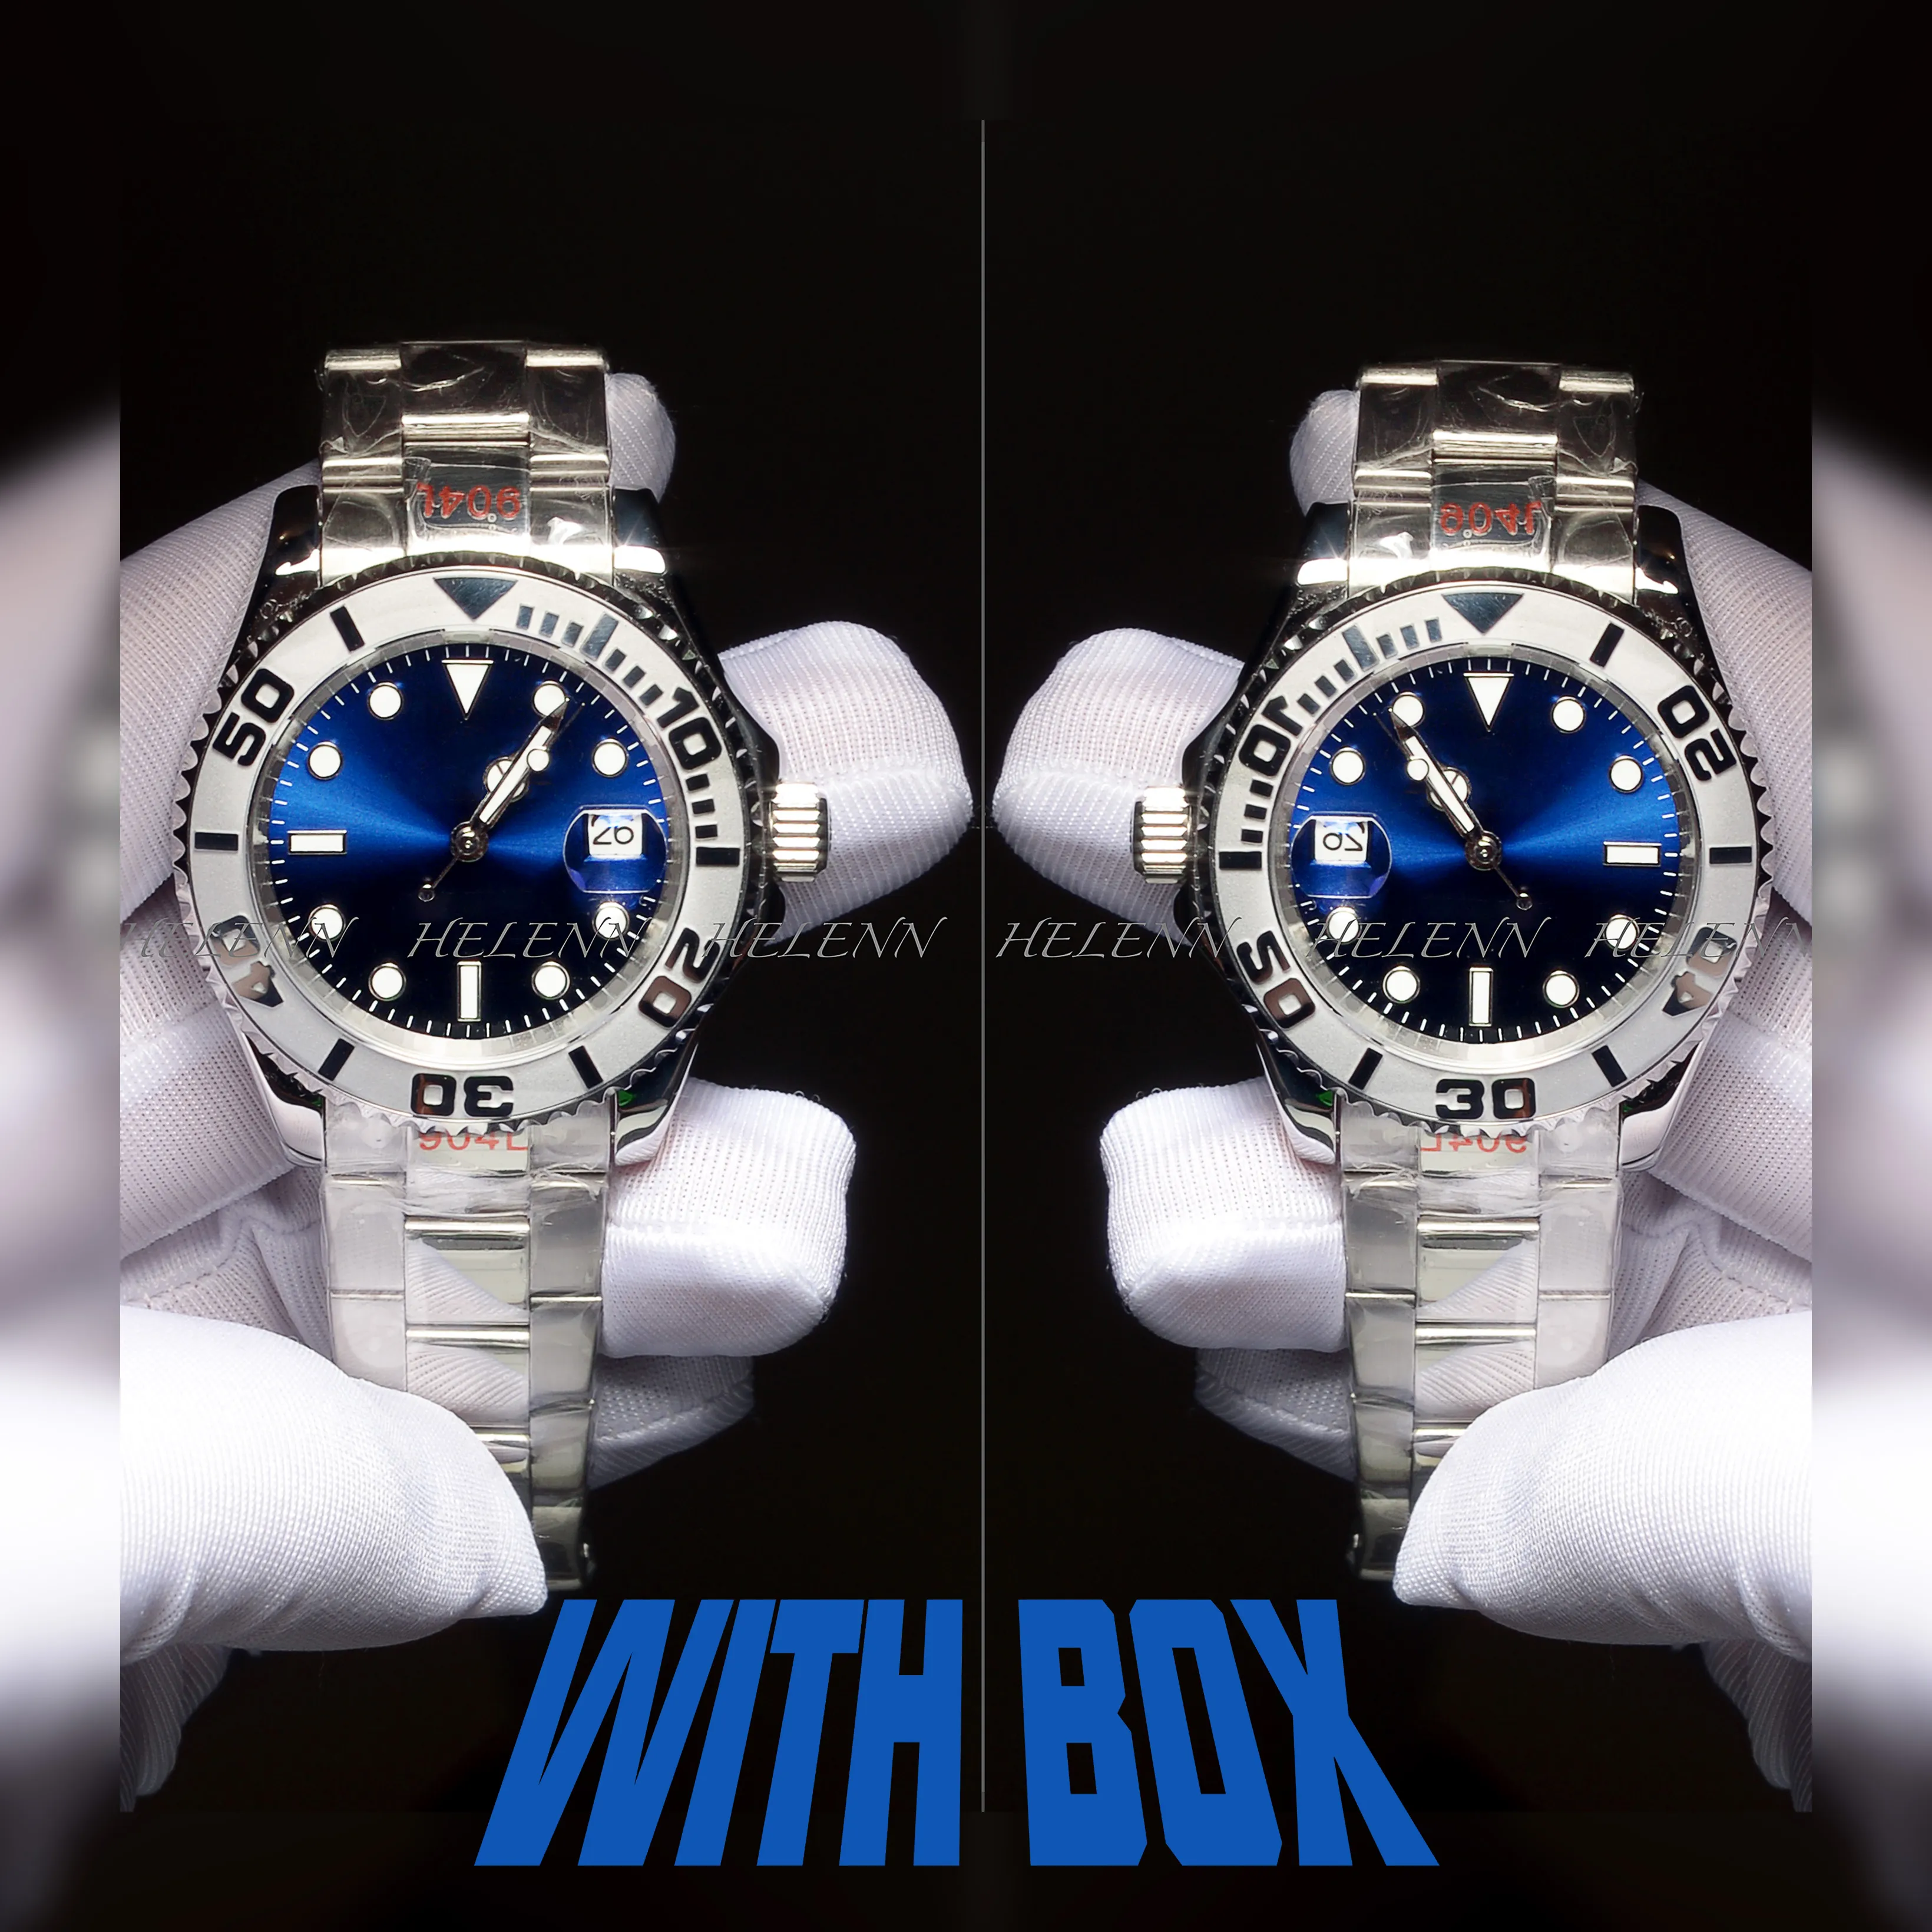 with box man watch 41mm mechanical 2813 automatic ceramic bezel sapphire watche luxury swiss watch for man 44mm watches high quality designer watches Montre de luxe